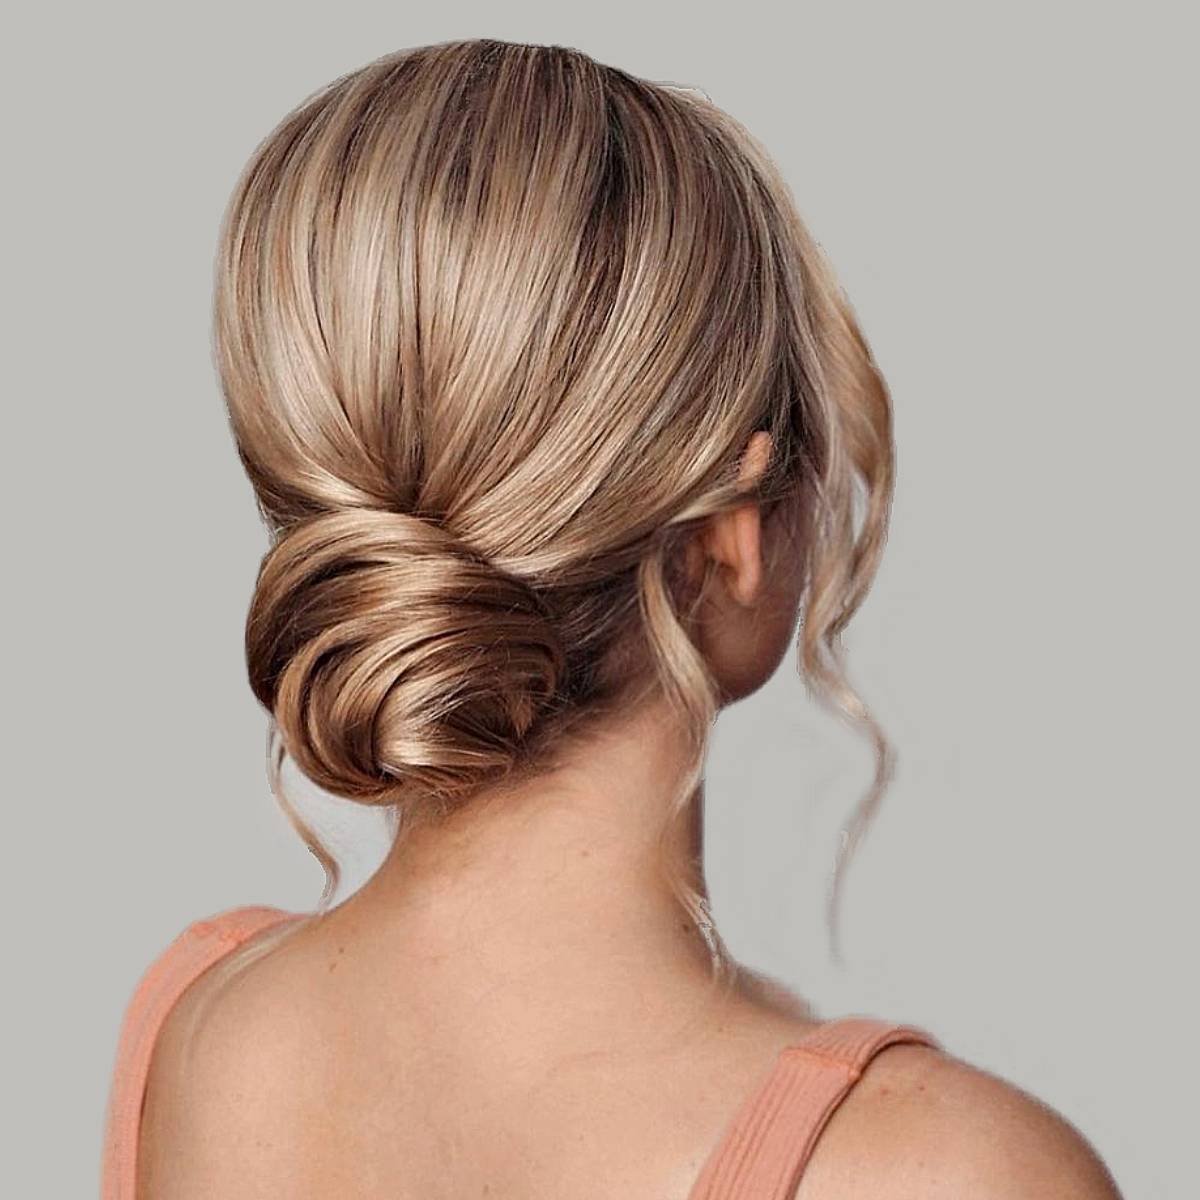 6 Simple Updo Hairstyles For Medium Or Long Hair